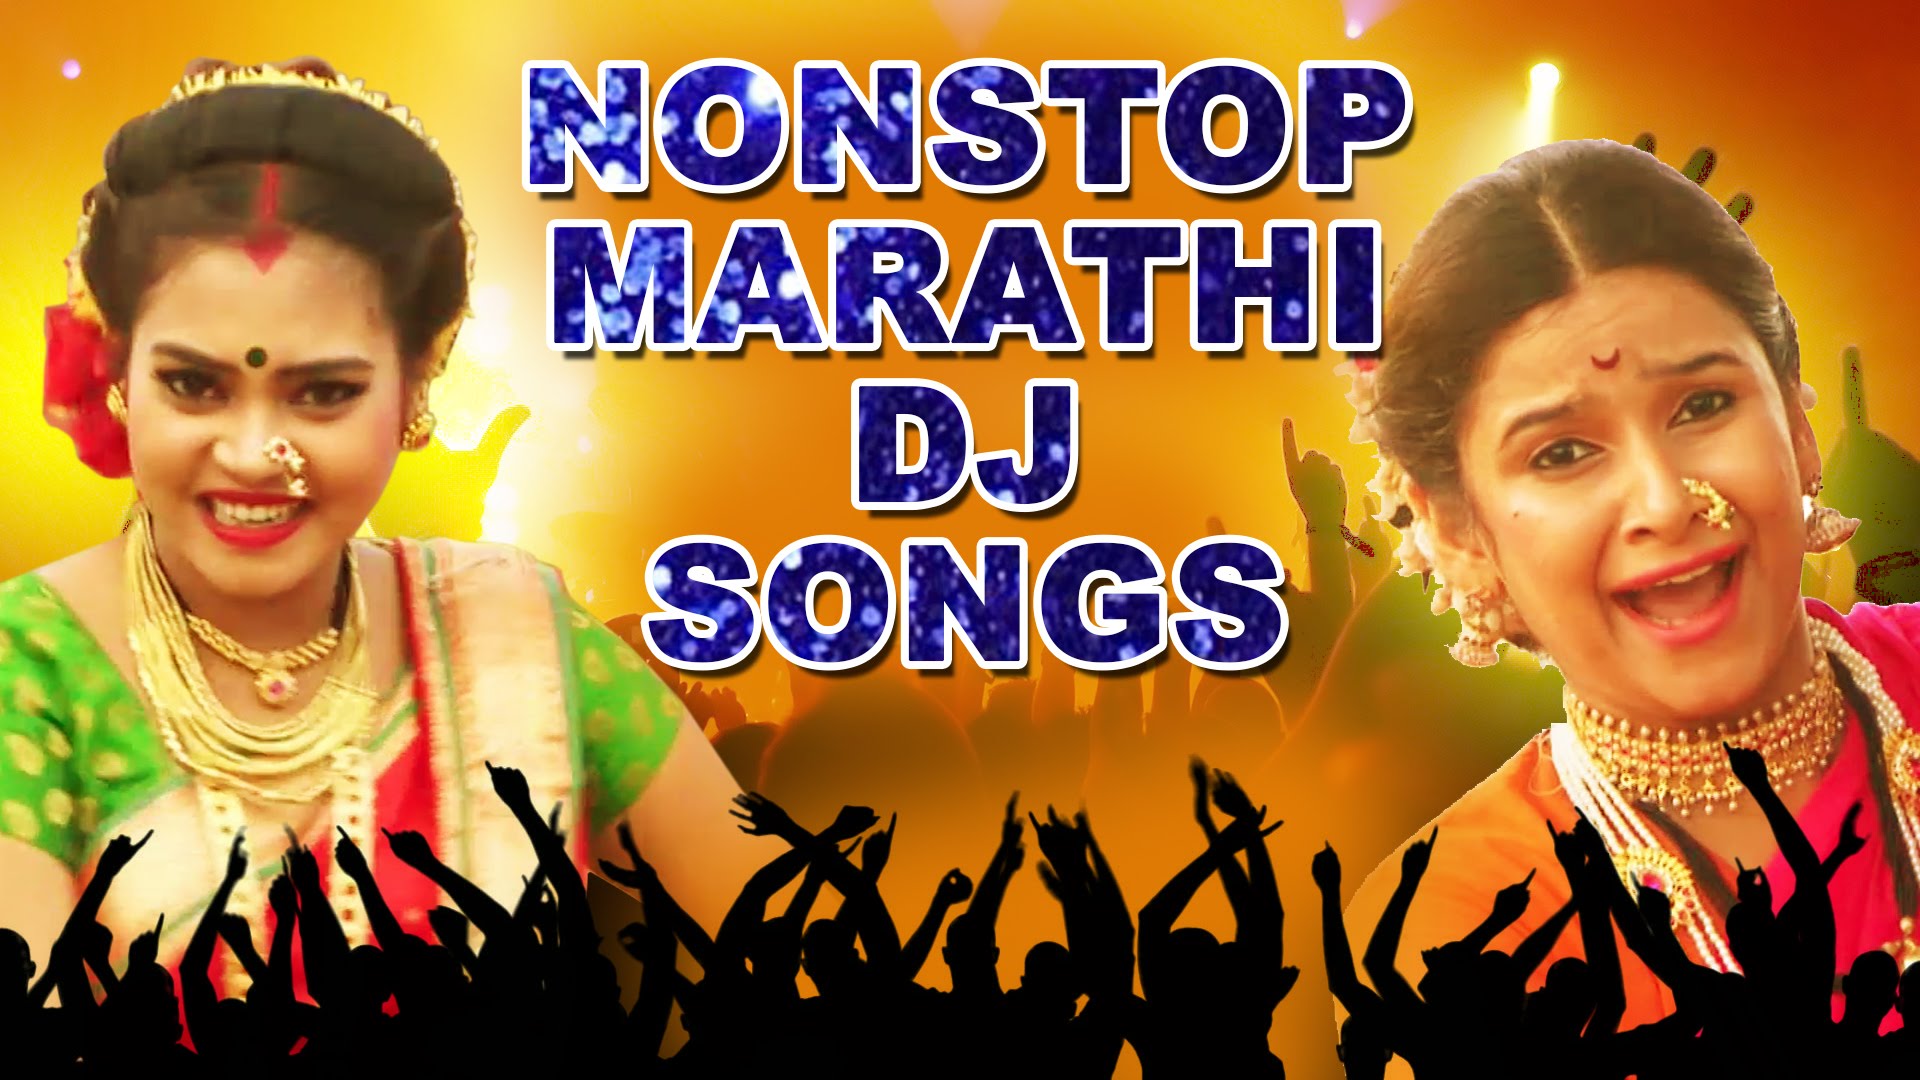 all marathi movies mp3 songs free download